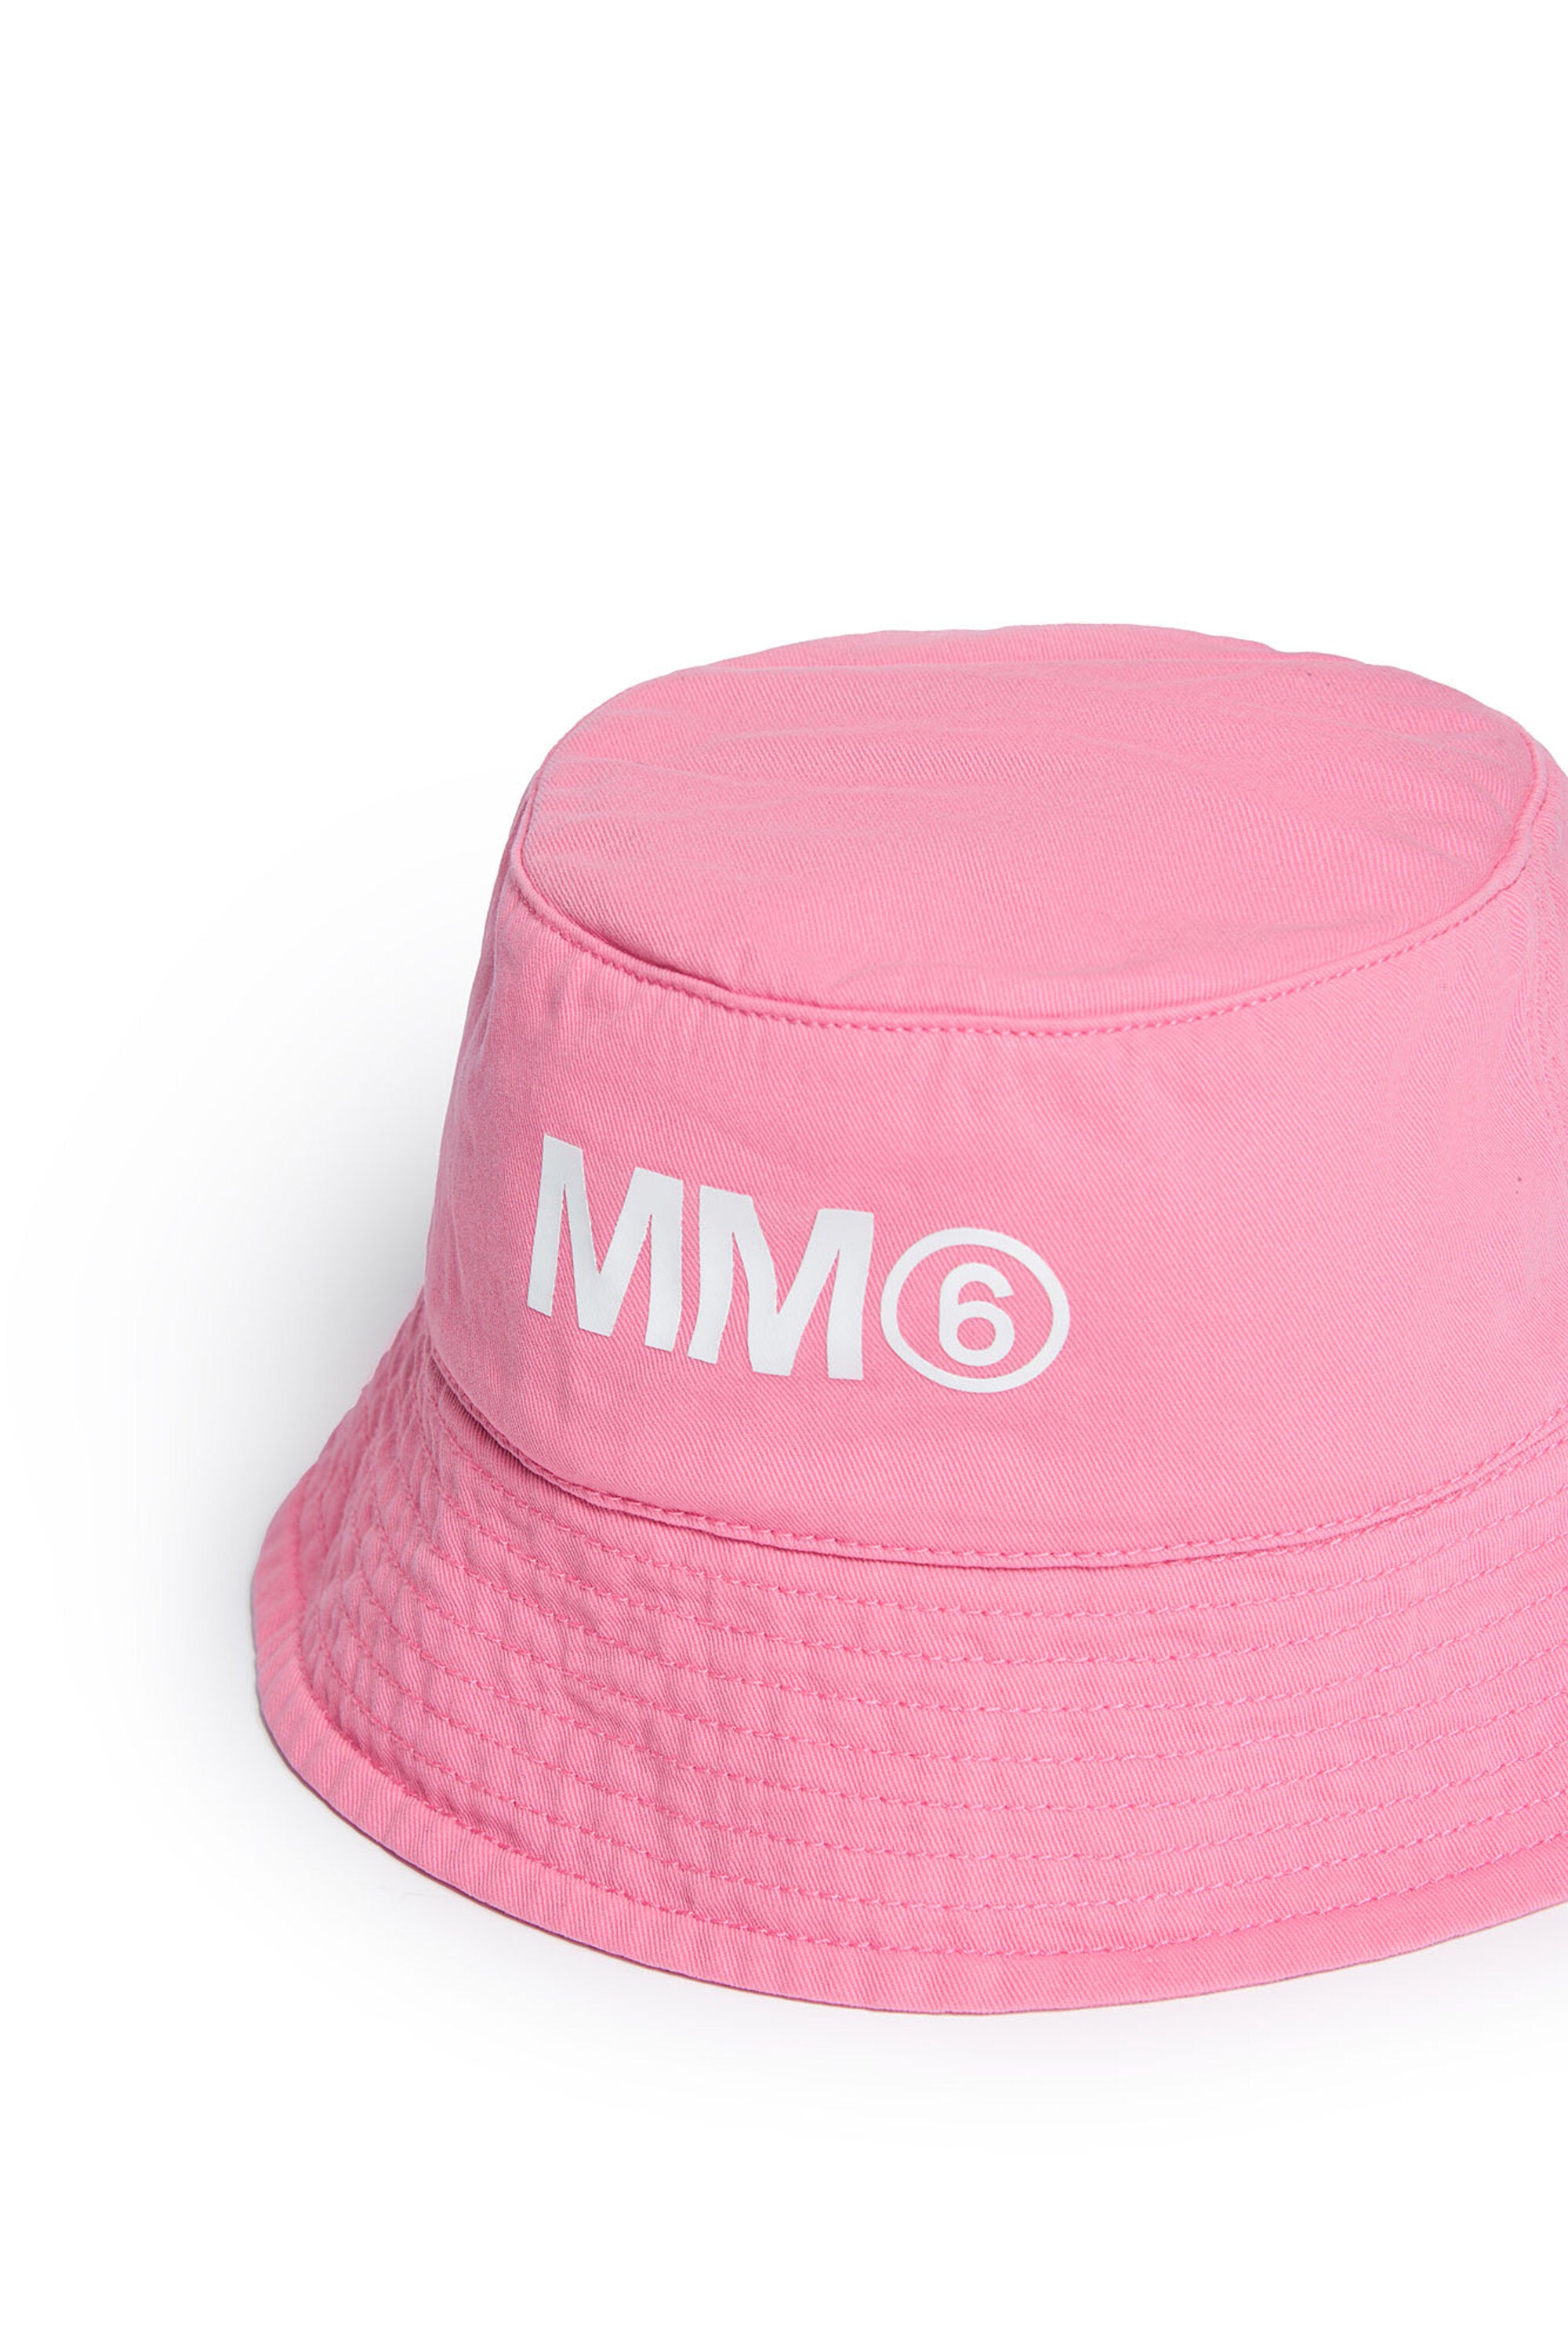 Fisherman hat with MM6 logo